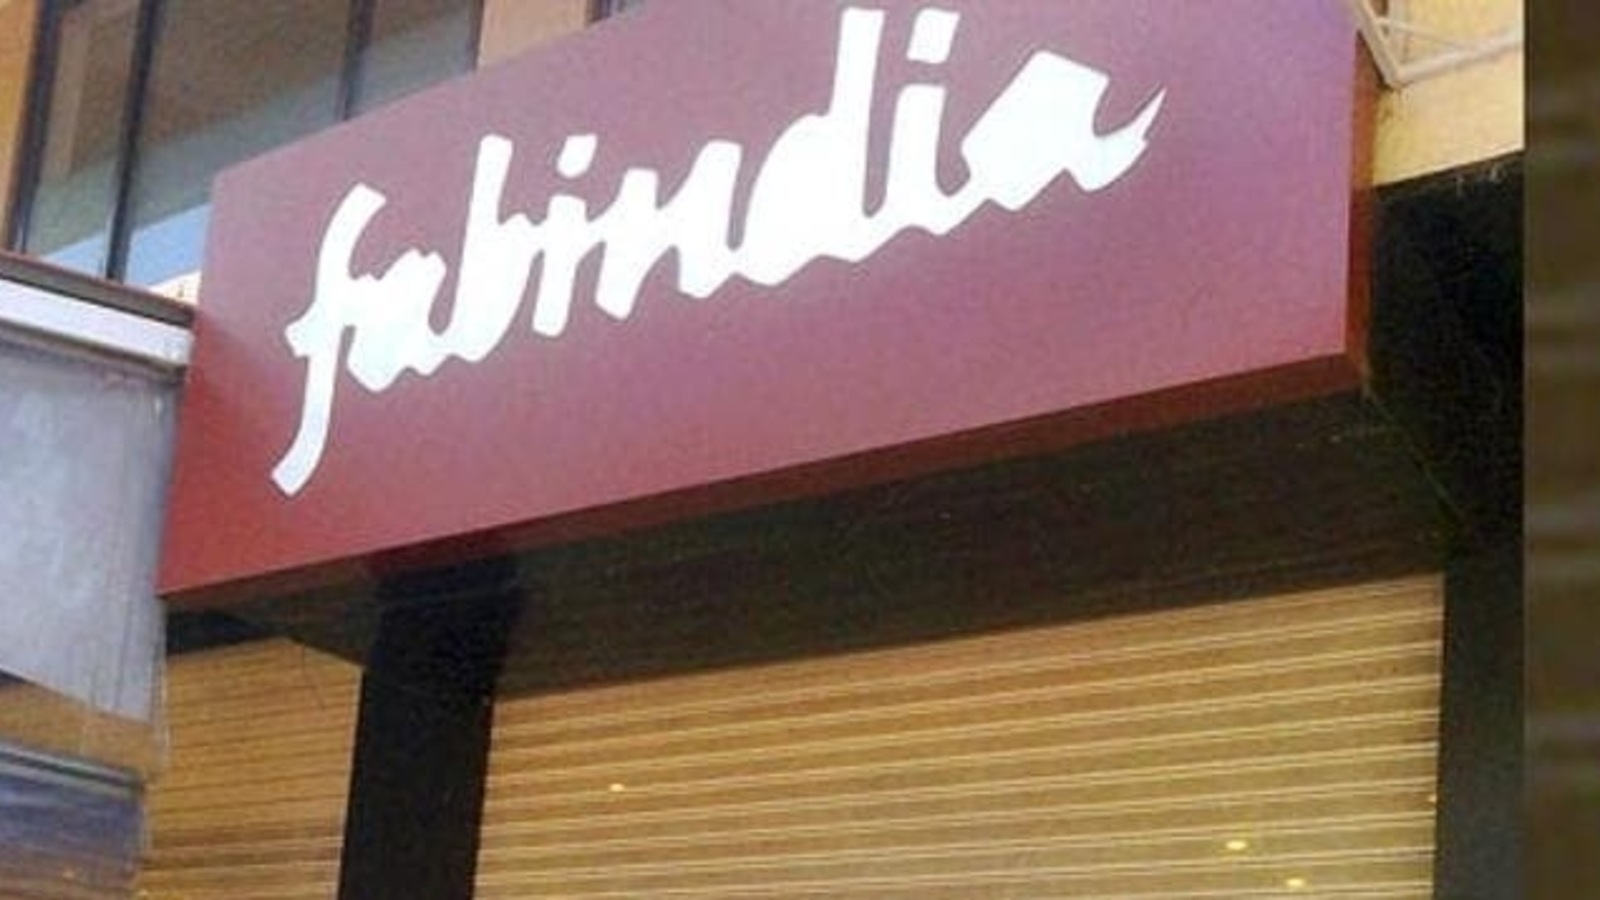 Fabindia: A Model for Sustainable Business